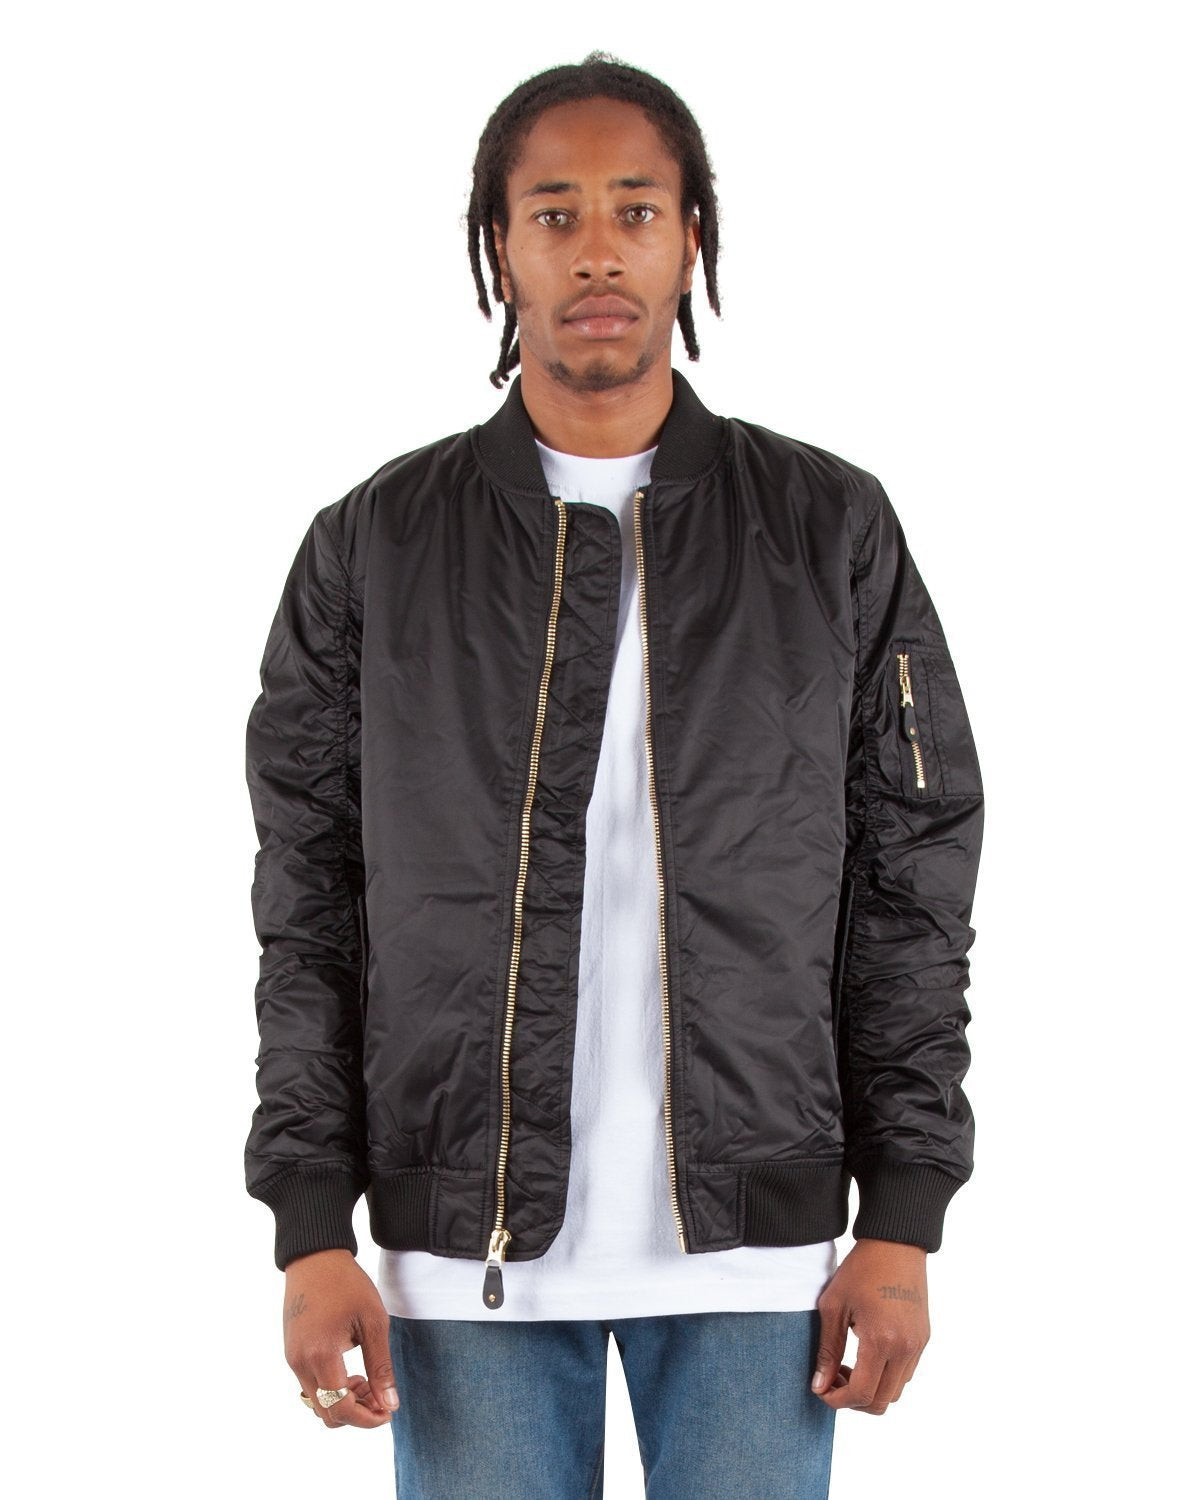 Black Casual Jacket for Men 'The Lord of the Skies' - ID: 43083